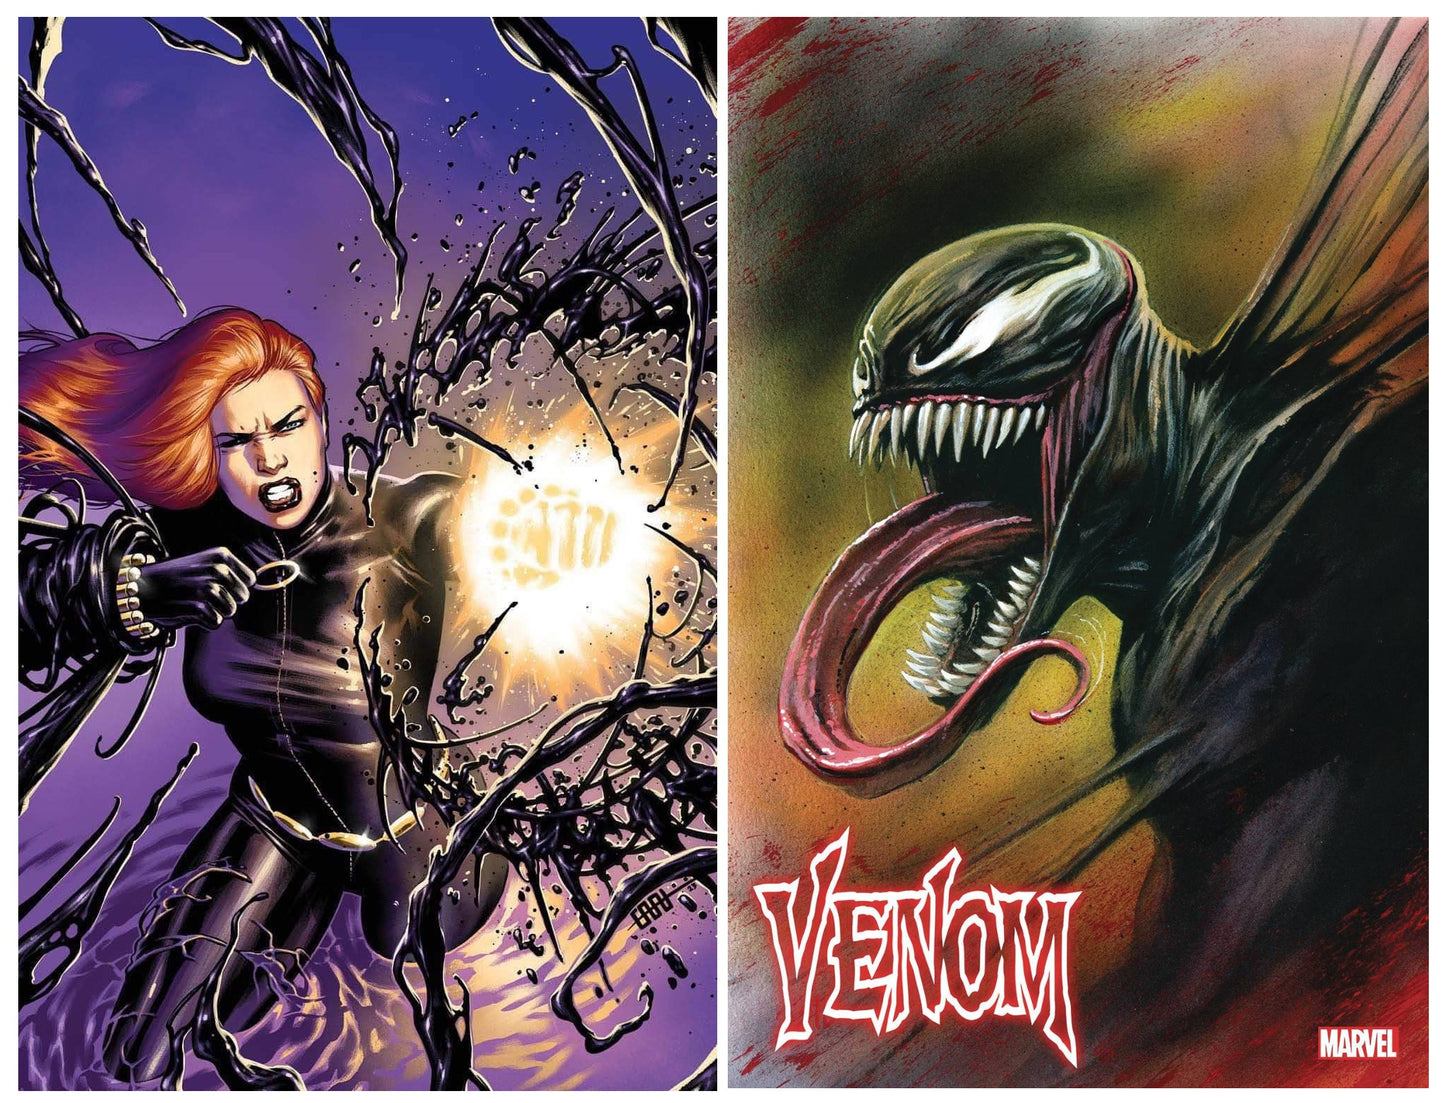 VENOM #26 CAFU VIRGIN VARIANT LIMITED TO 400 COPIES WITH NUMBERED COA + 1:25 VARIANT